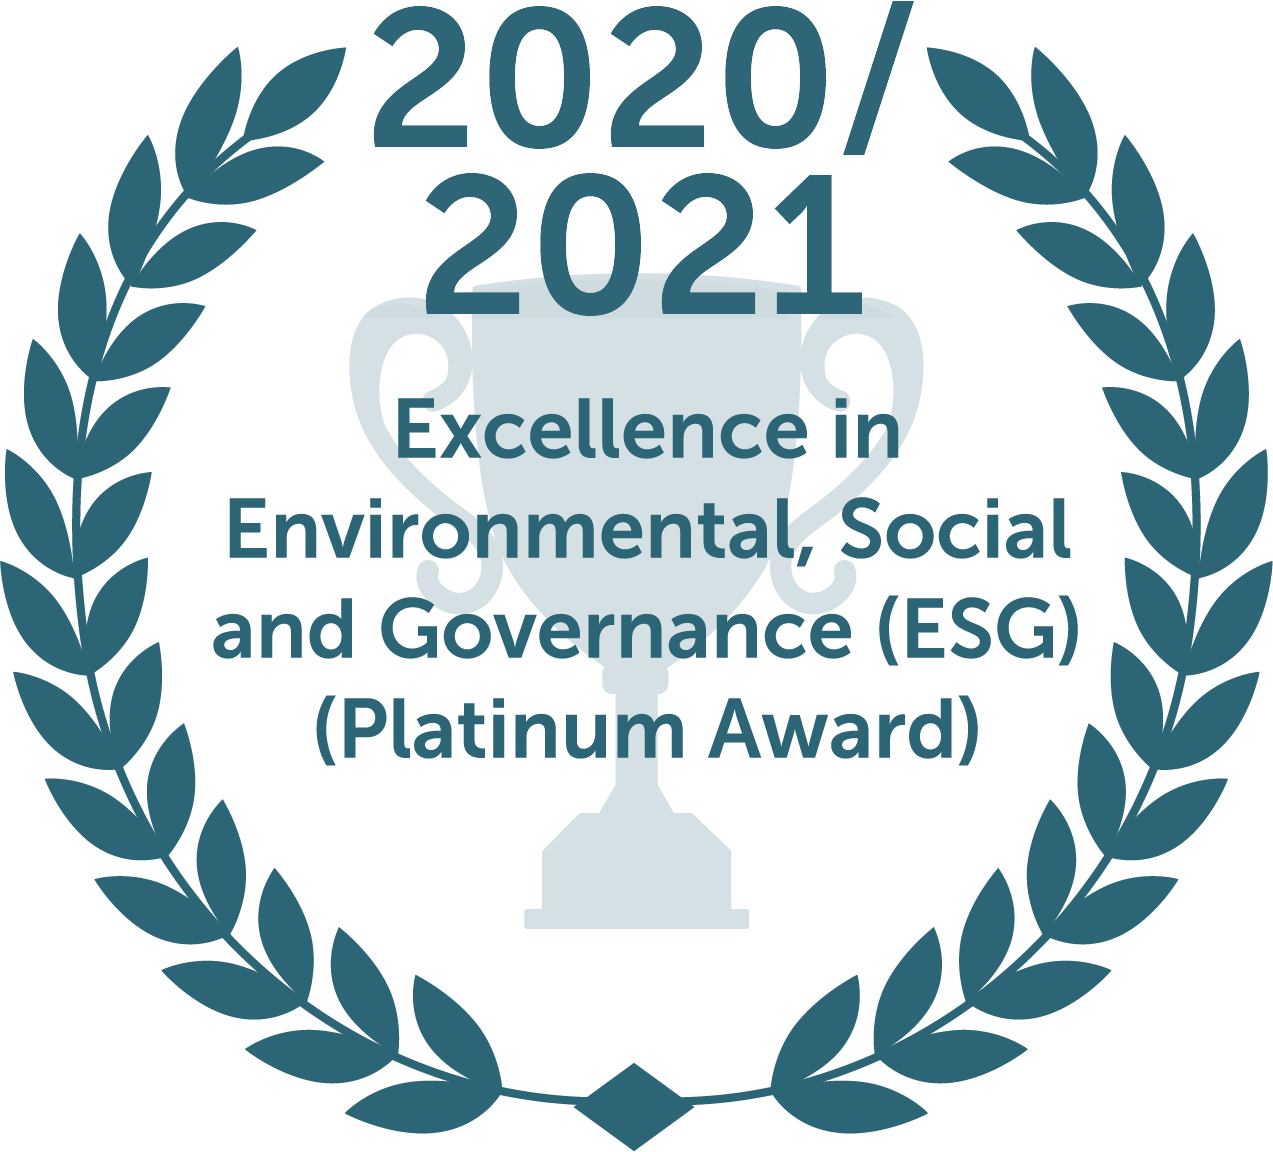 Excellence in Environmental, Social and Governance (Platinum Award)